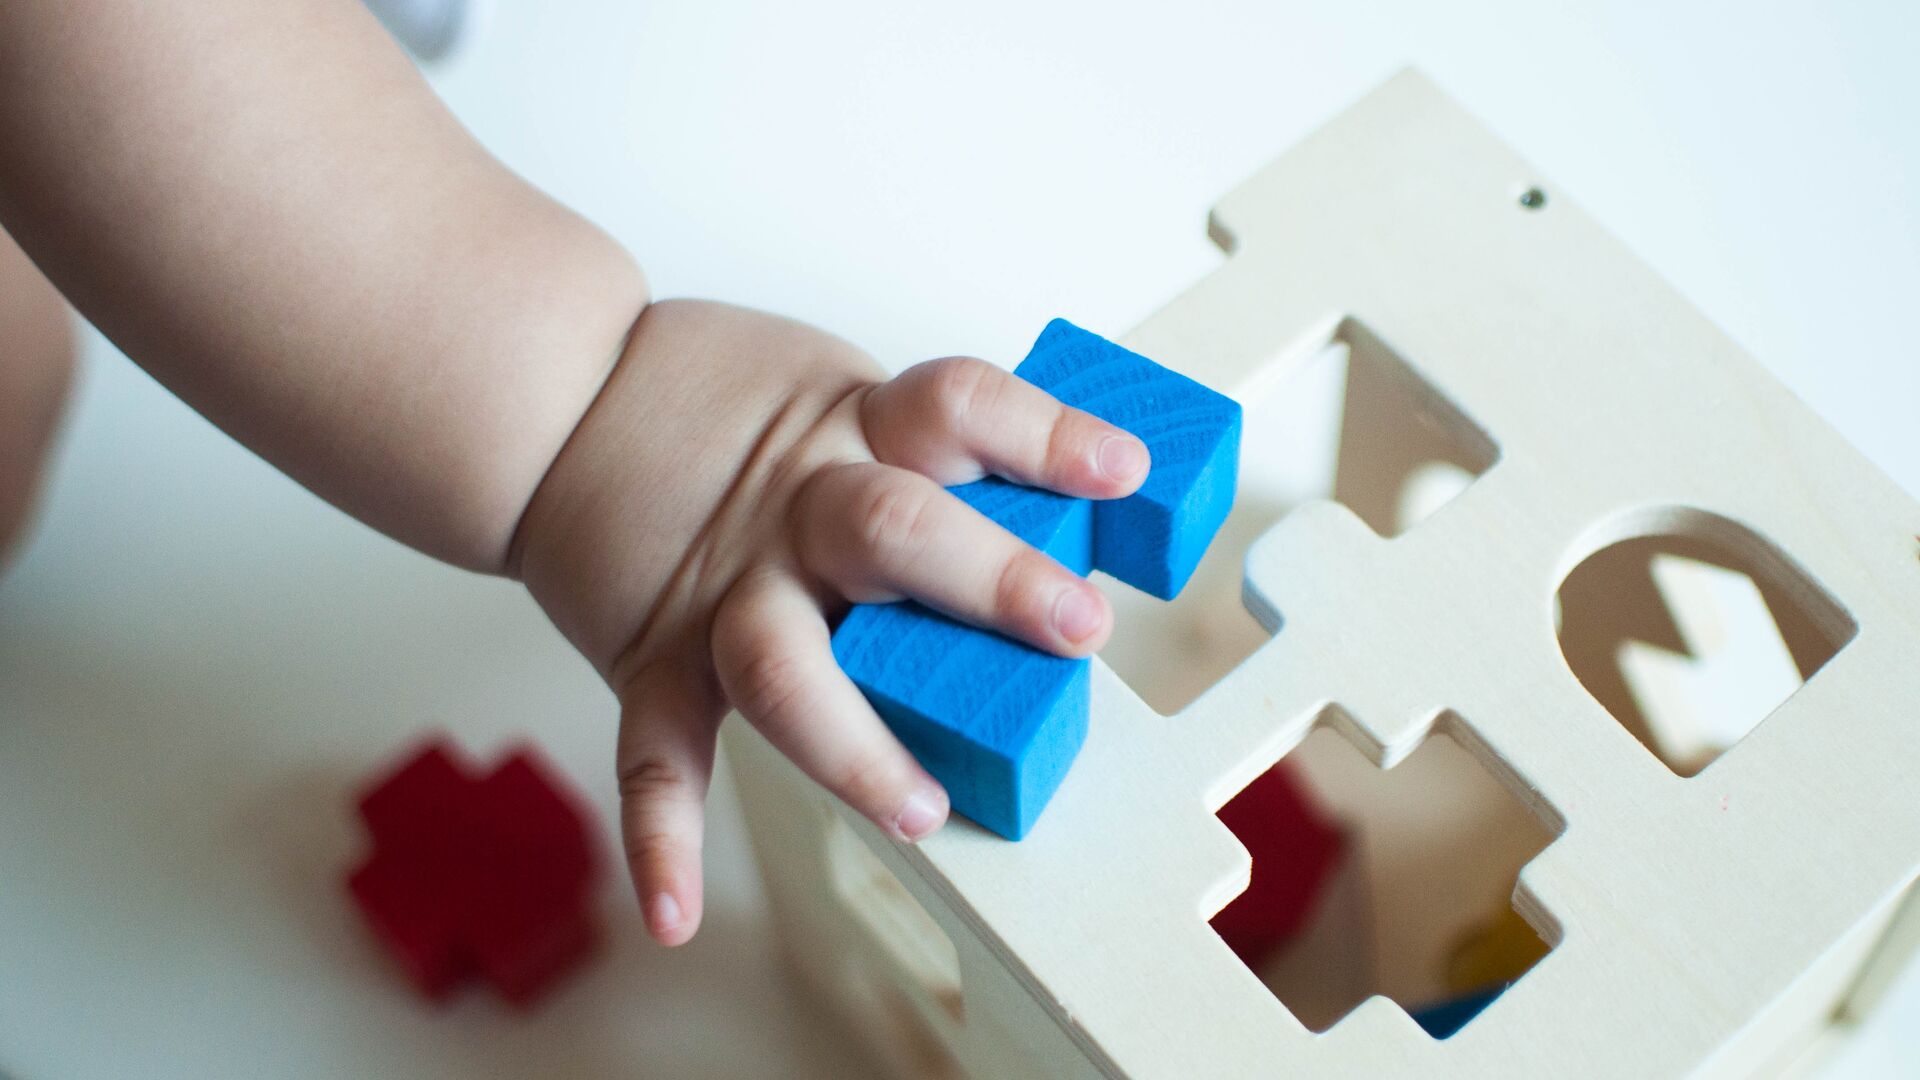 Baby placing a block as if it were a puzzle piece in its place. Representative of play and cognitive abilities in babies.